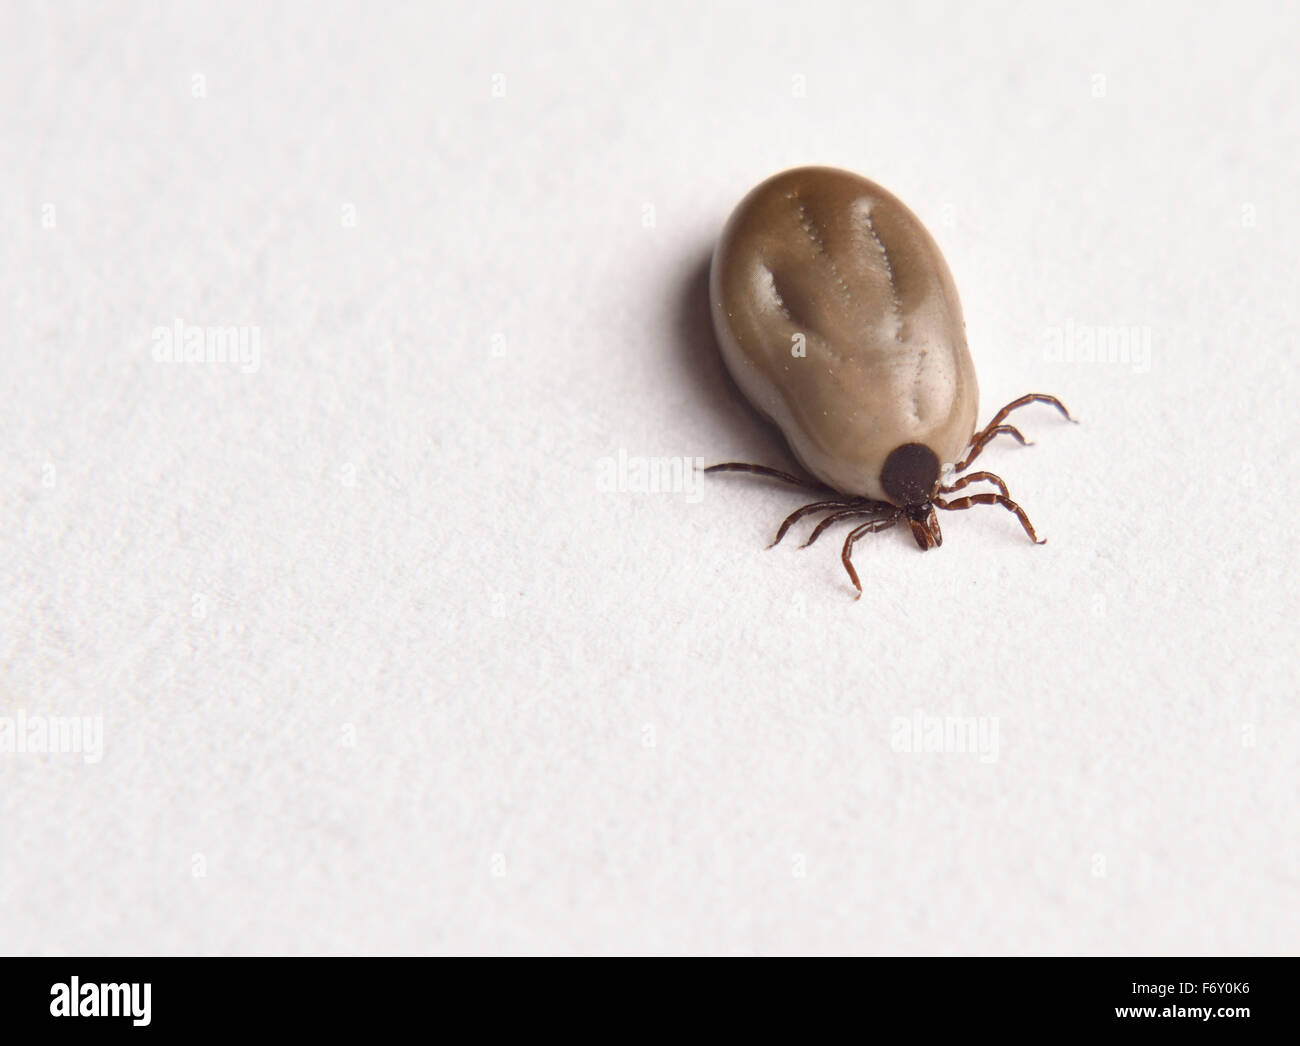 Engorged female Blacklegged Deer tick on white paper top view Stock Photo